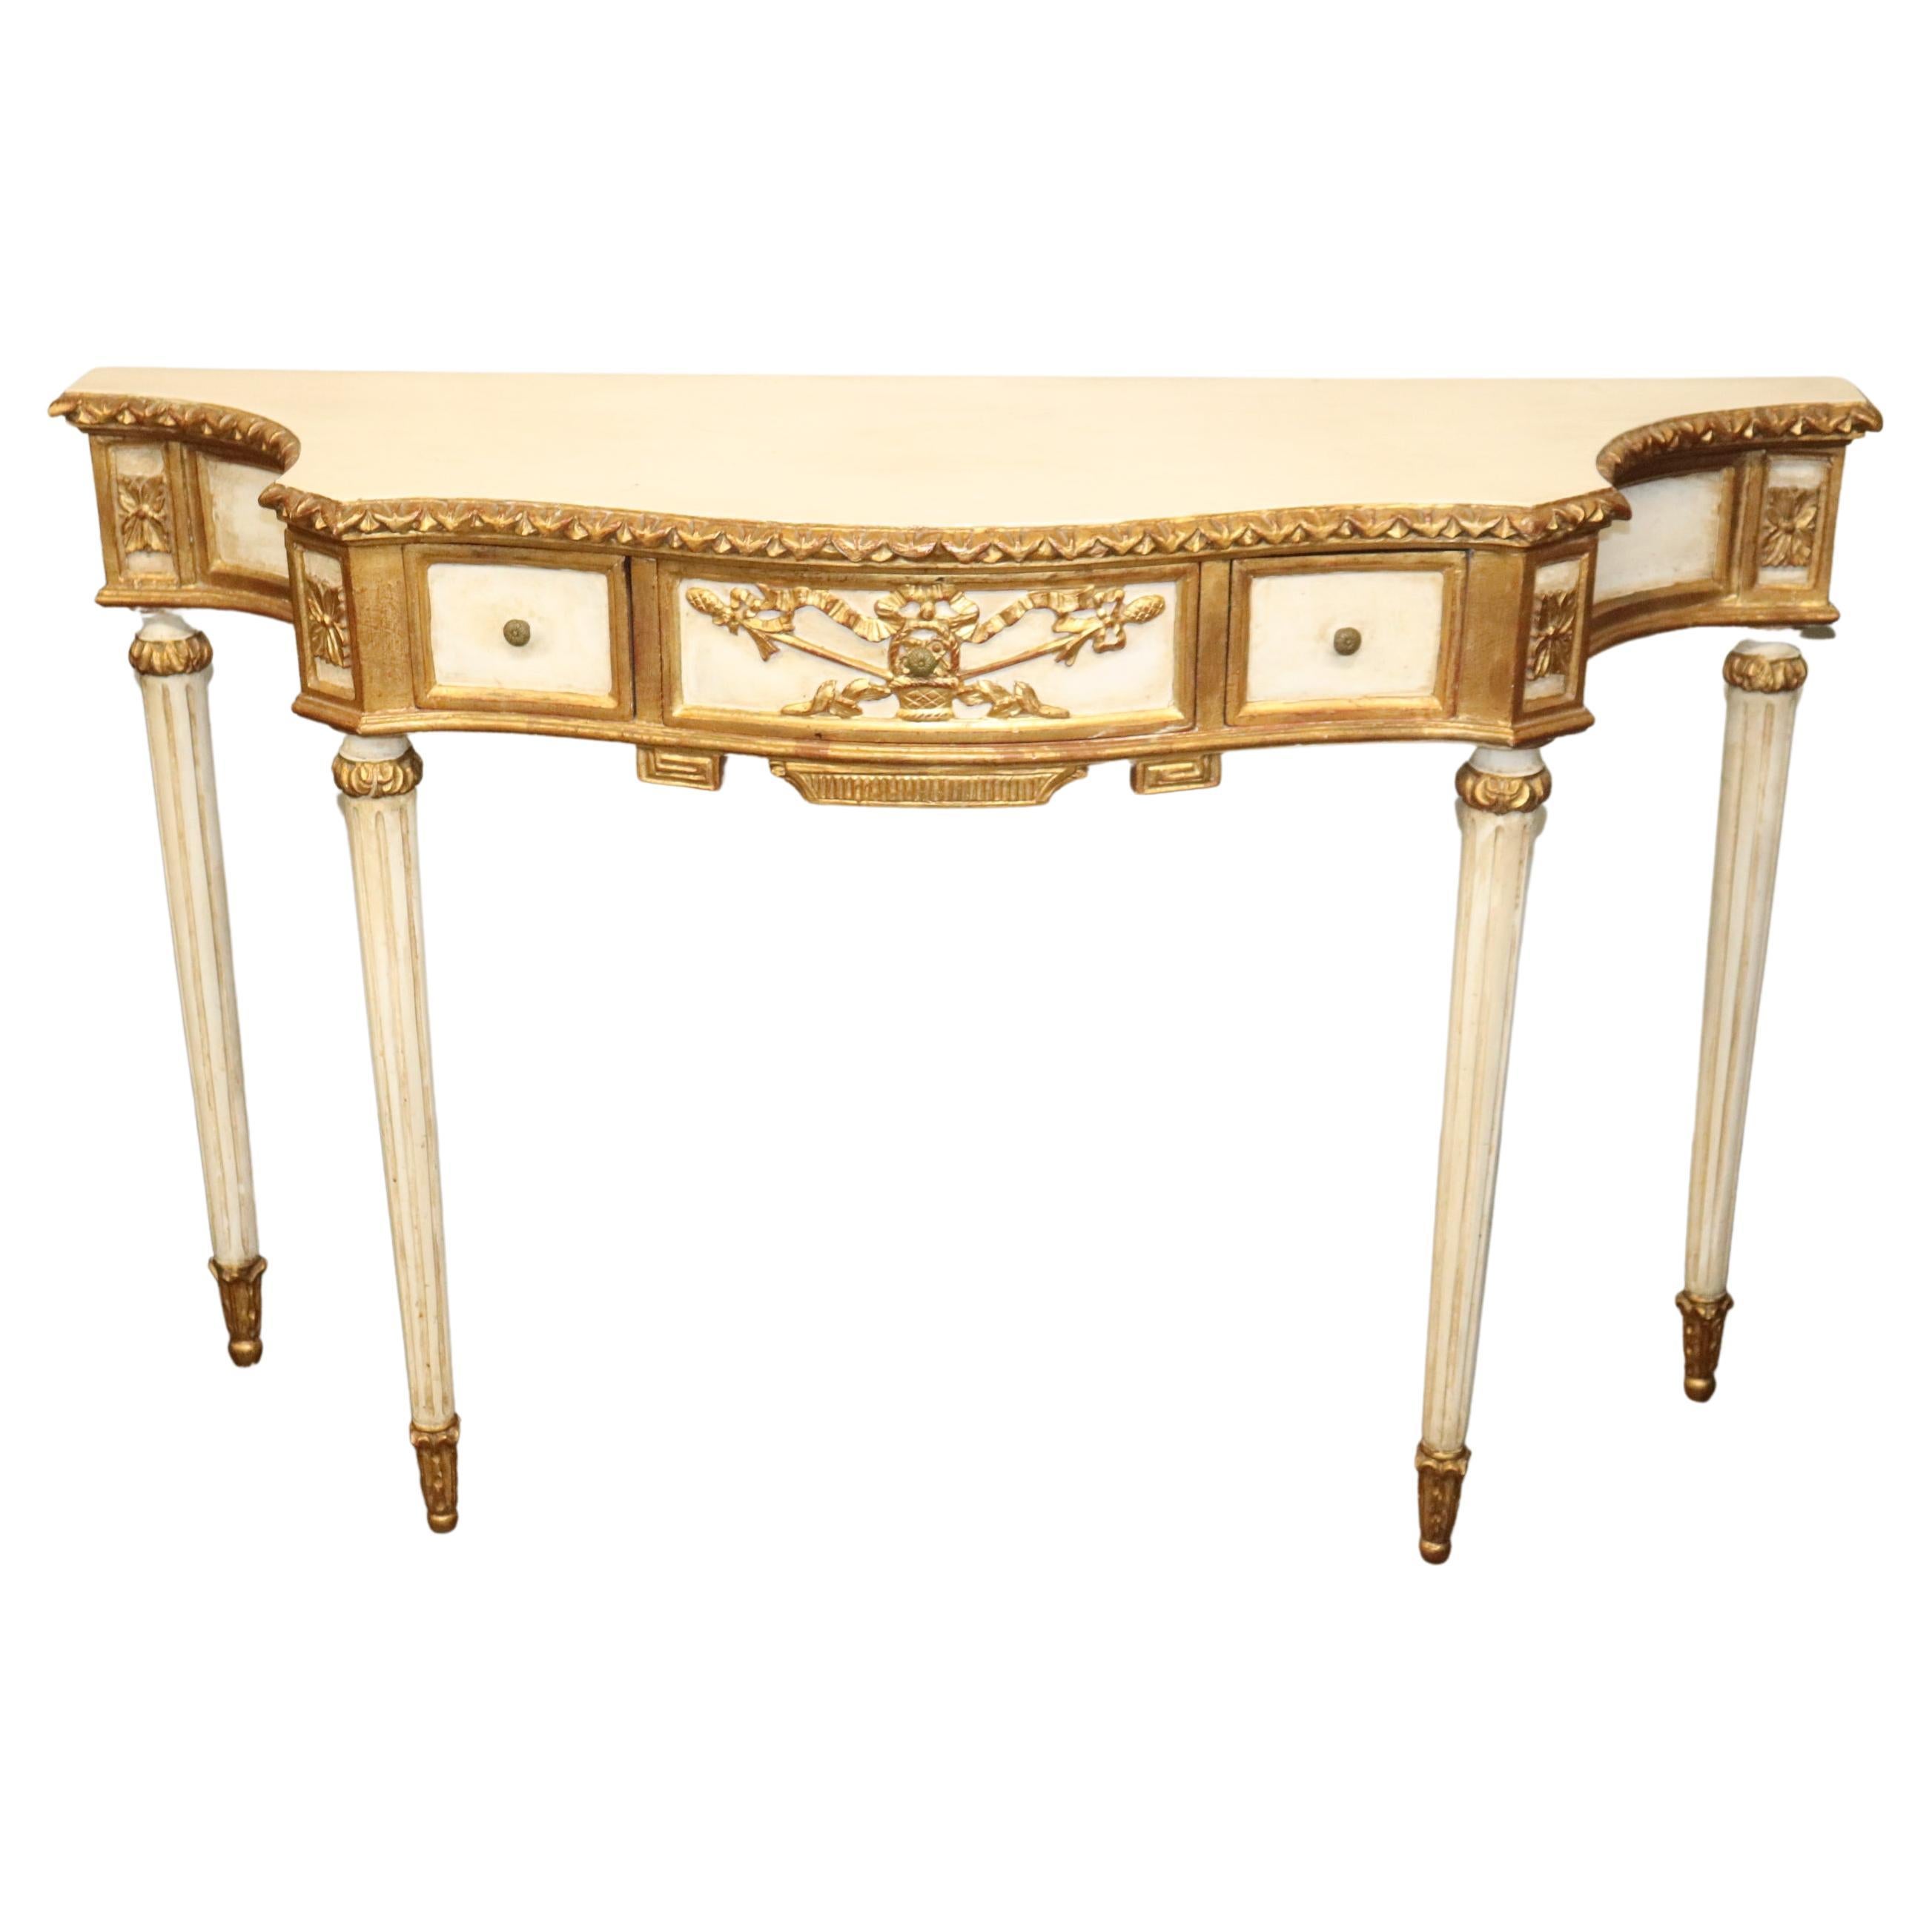 Antique White Painted and Gilded Florentine Italian Console Table, circa 1940s For Sale